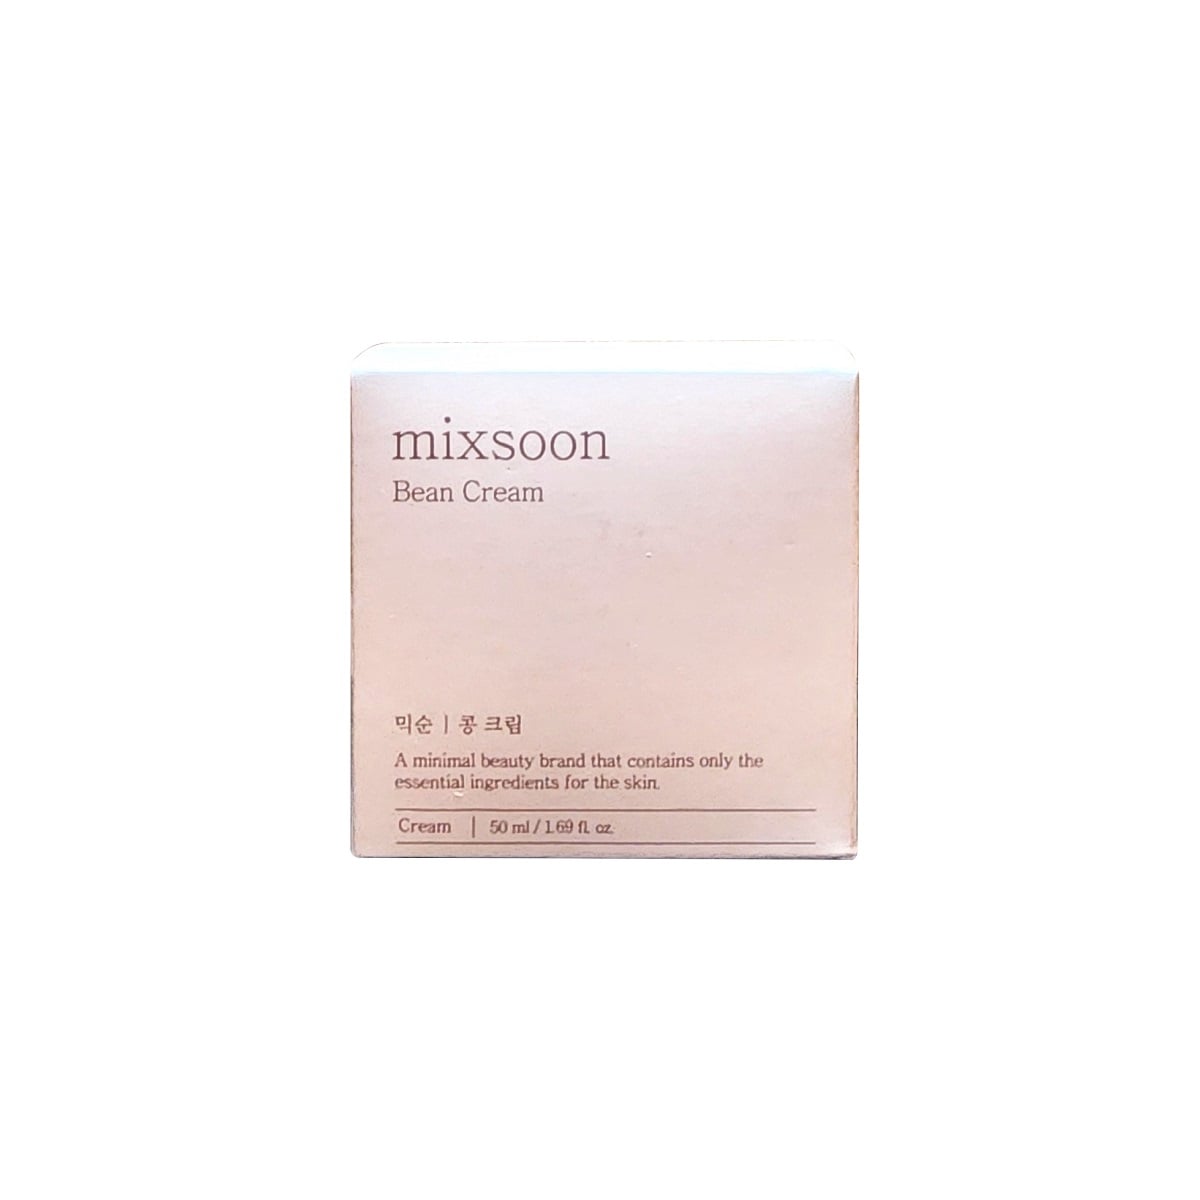 Product Label for mixsoon Bean Cream (50 mL)